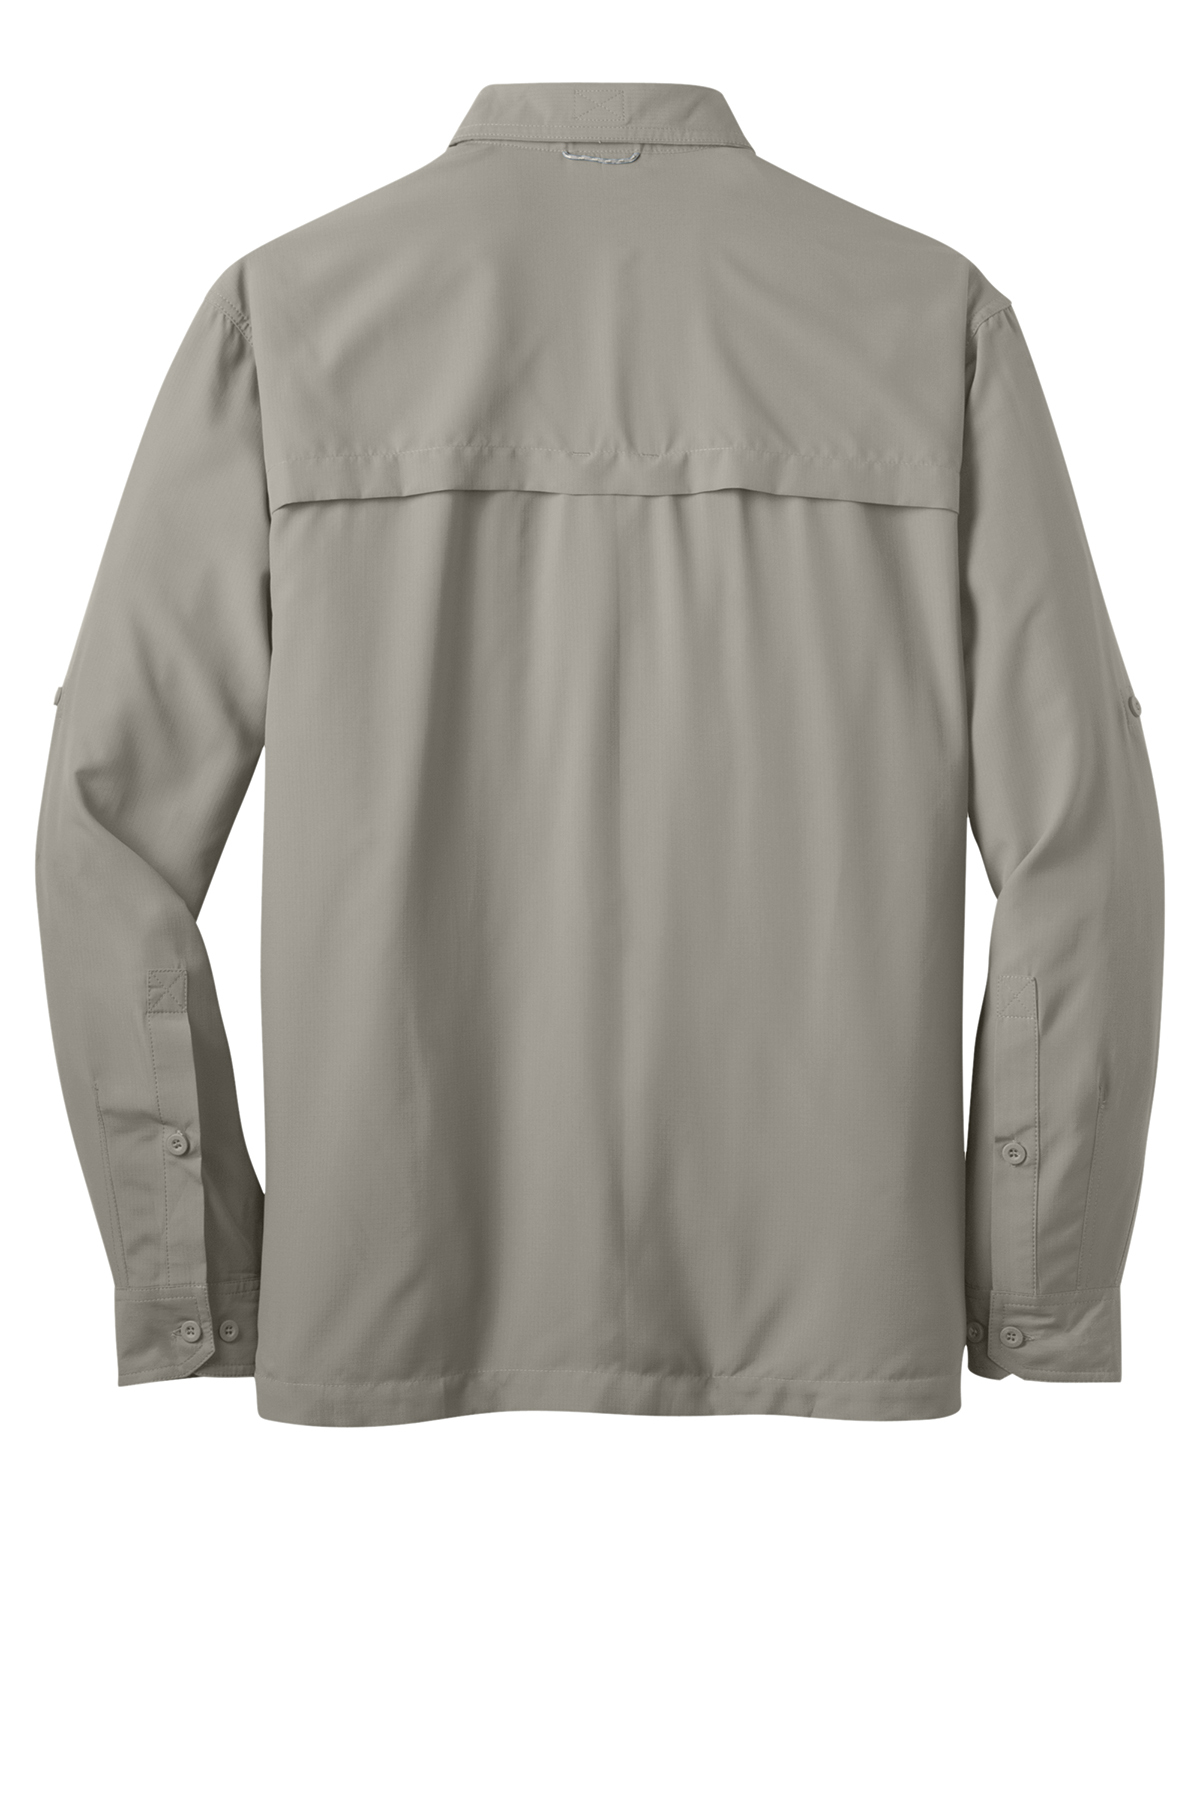 Purchase Eddie Bauer Jackets, Polos, Fishing Shirts & more